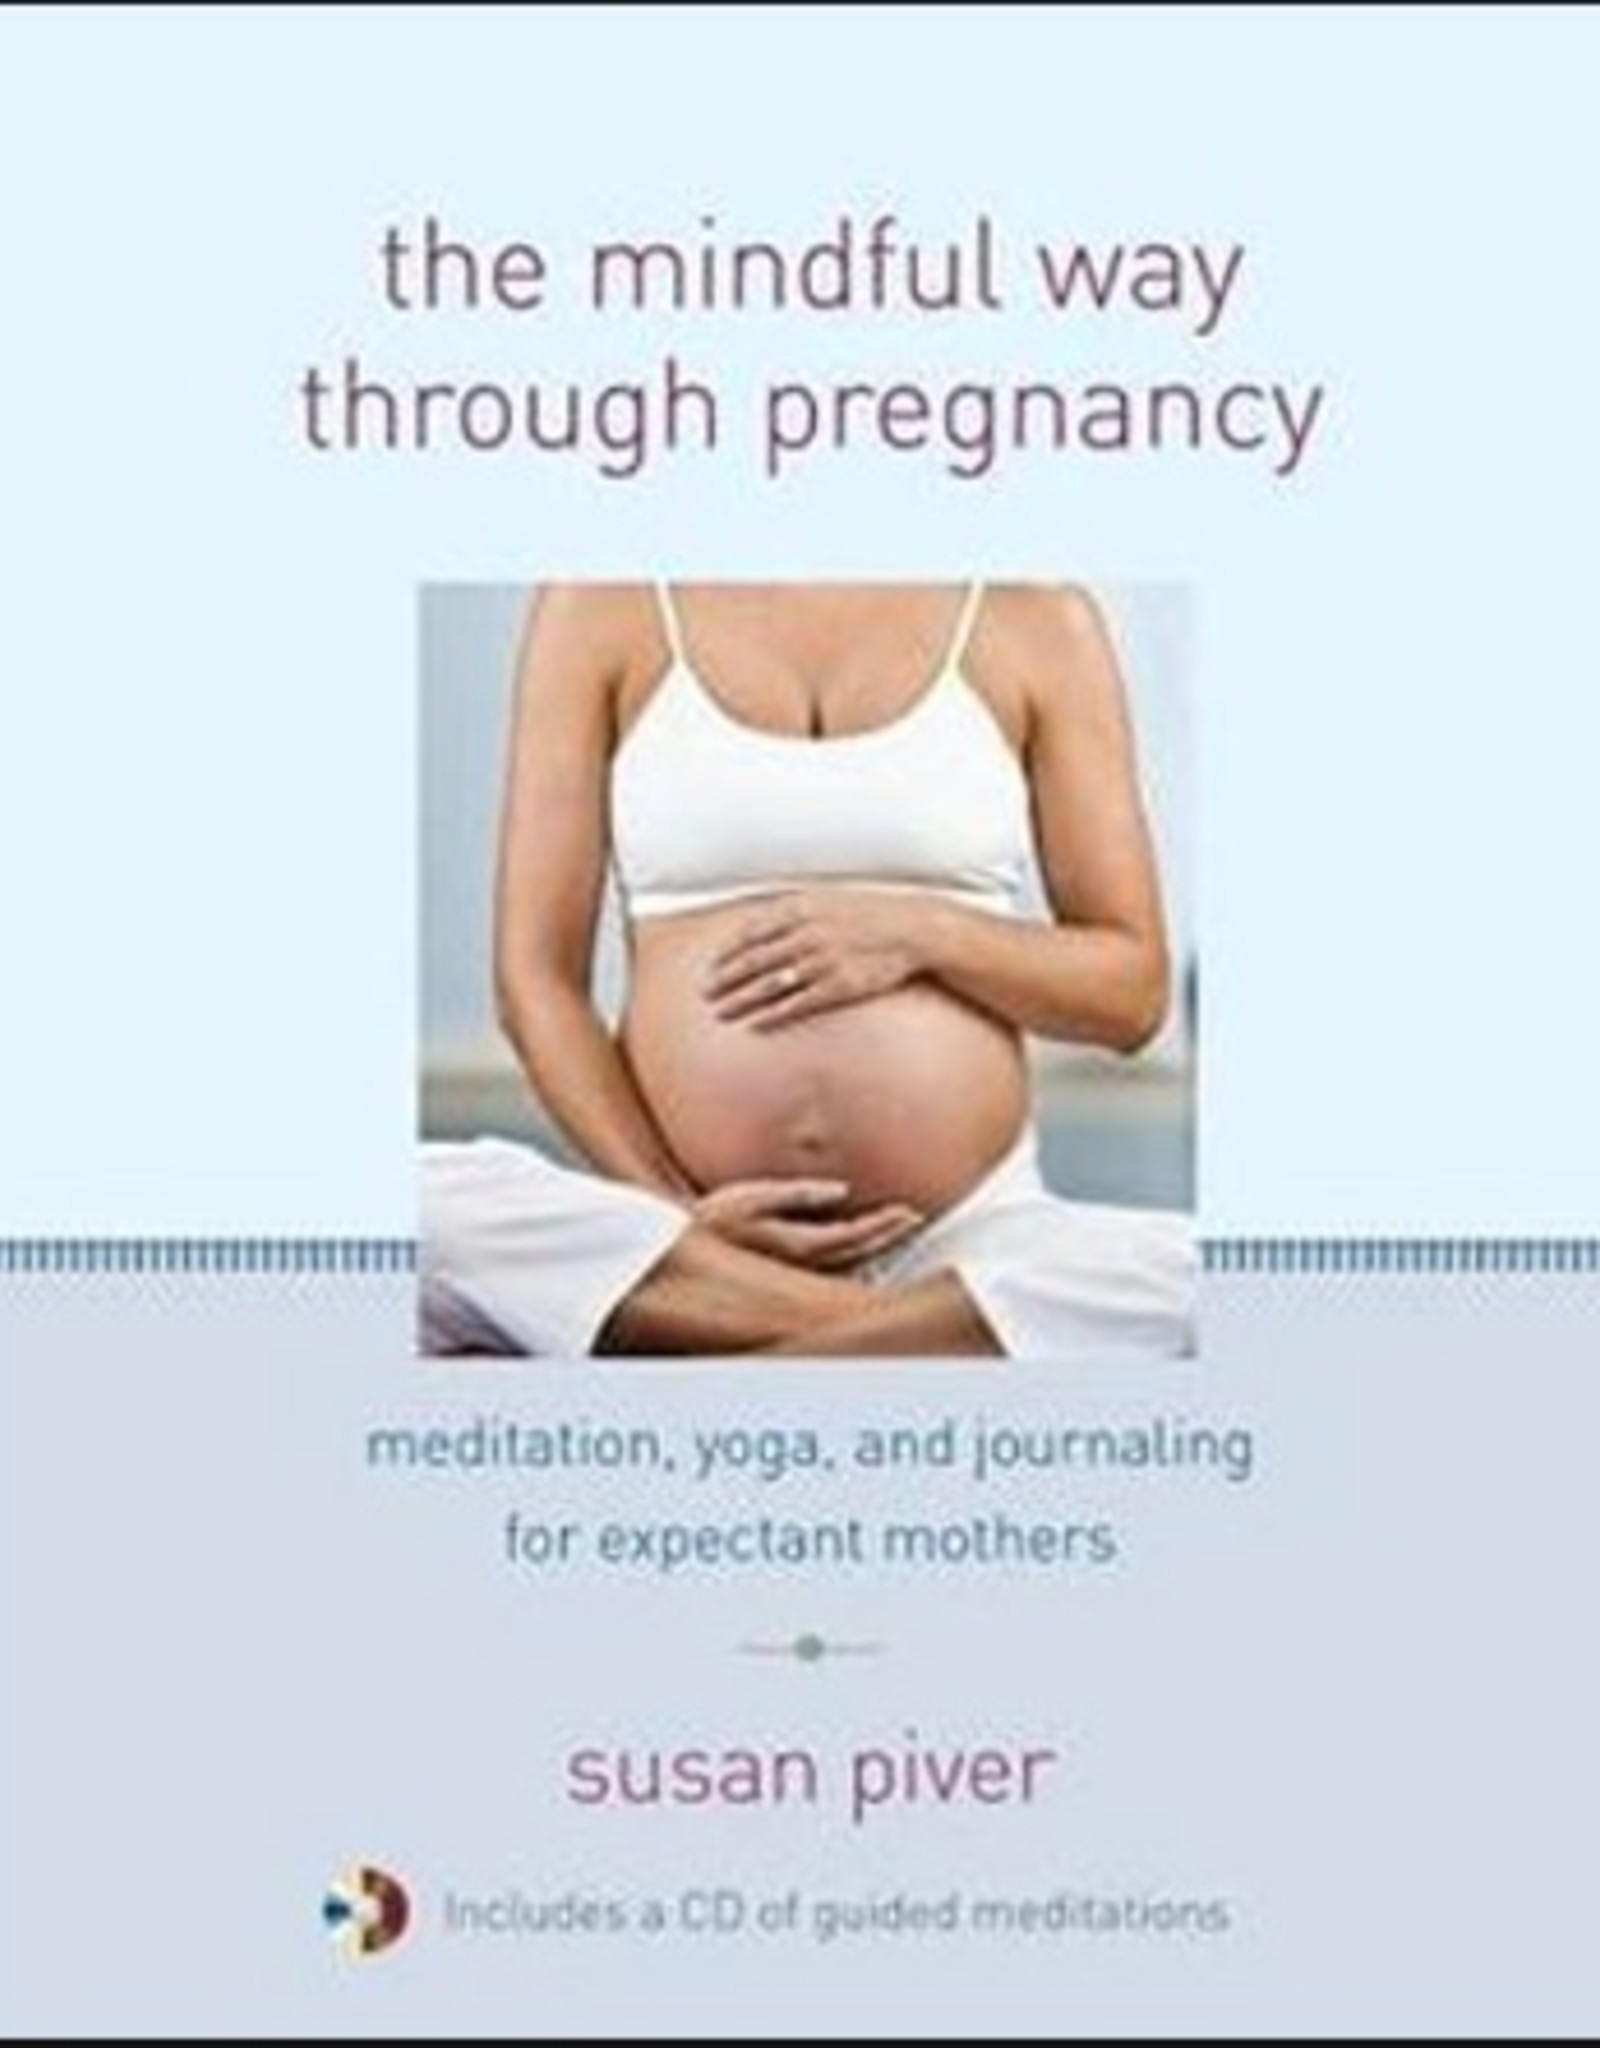 The Mindful Way through Pregnancy: Meditation, Yoga, and Journaling for Expectant Mothers